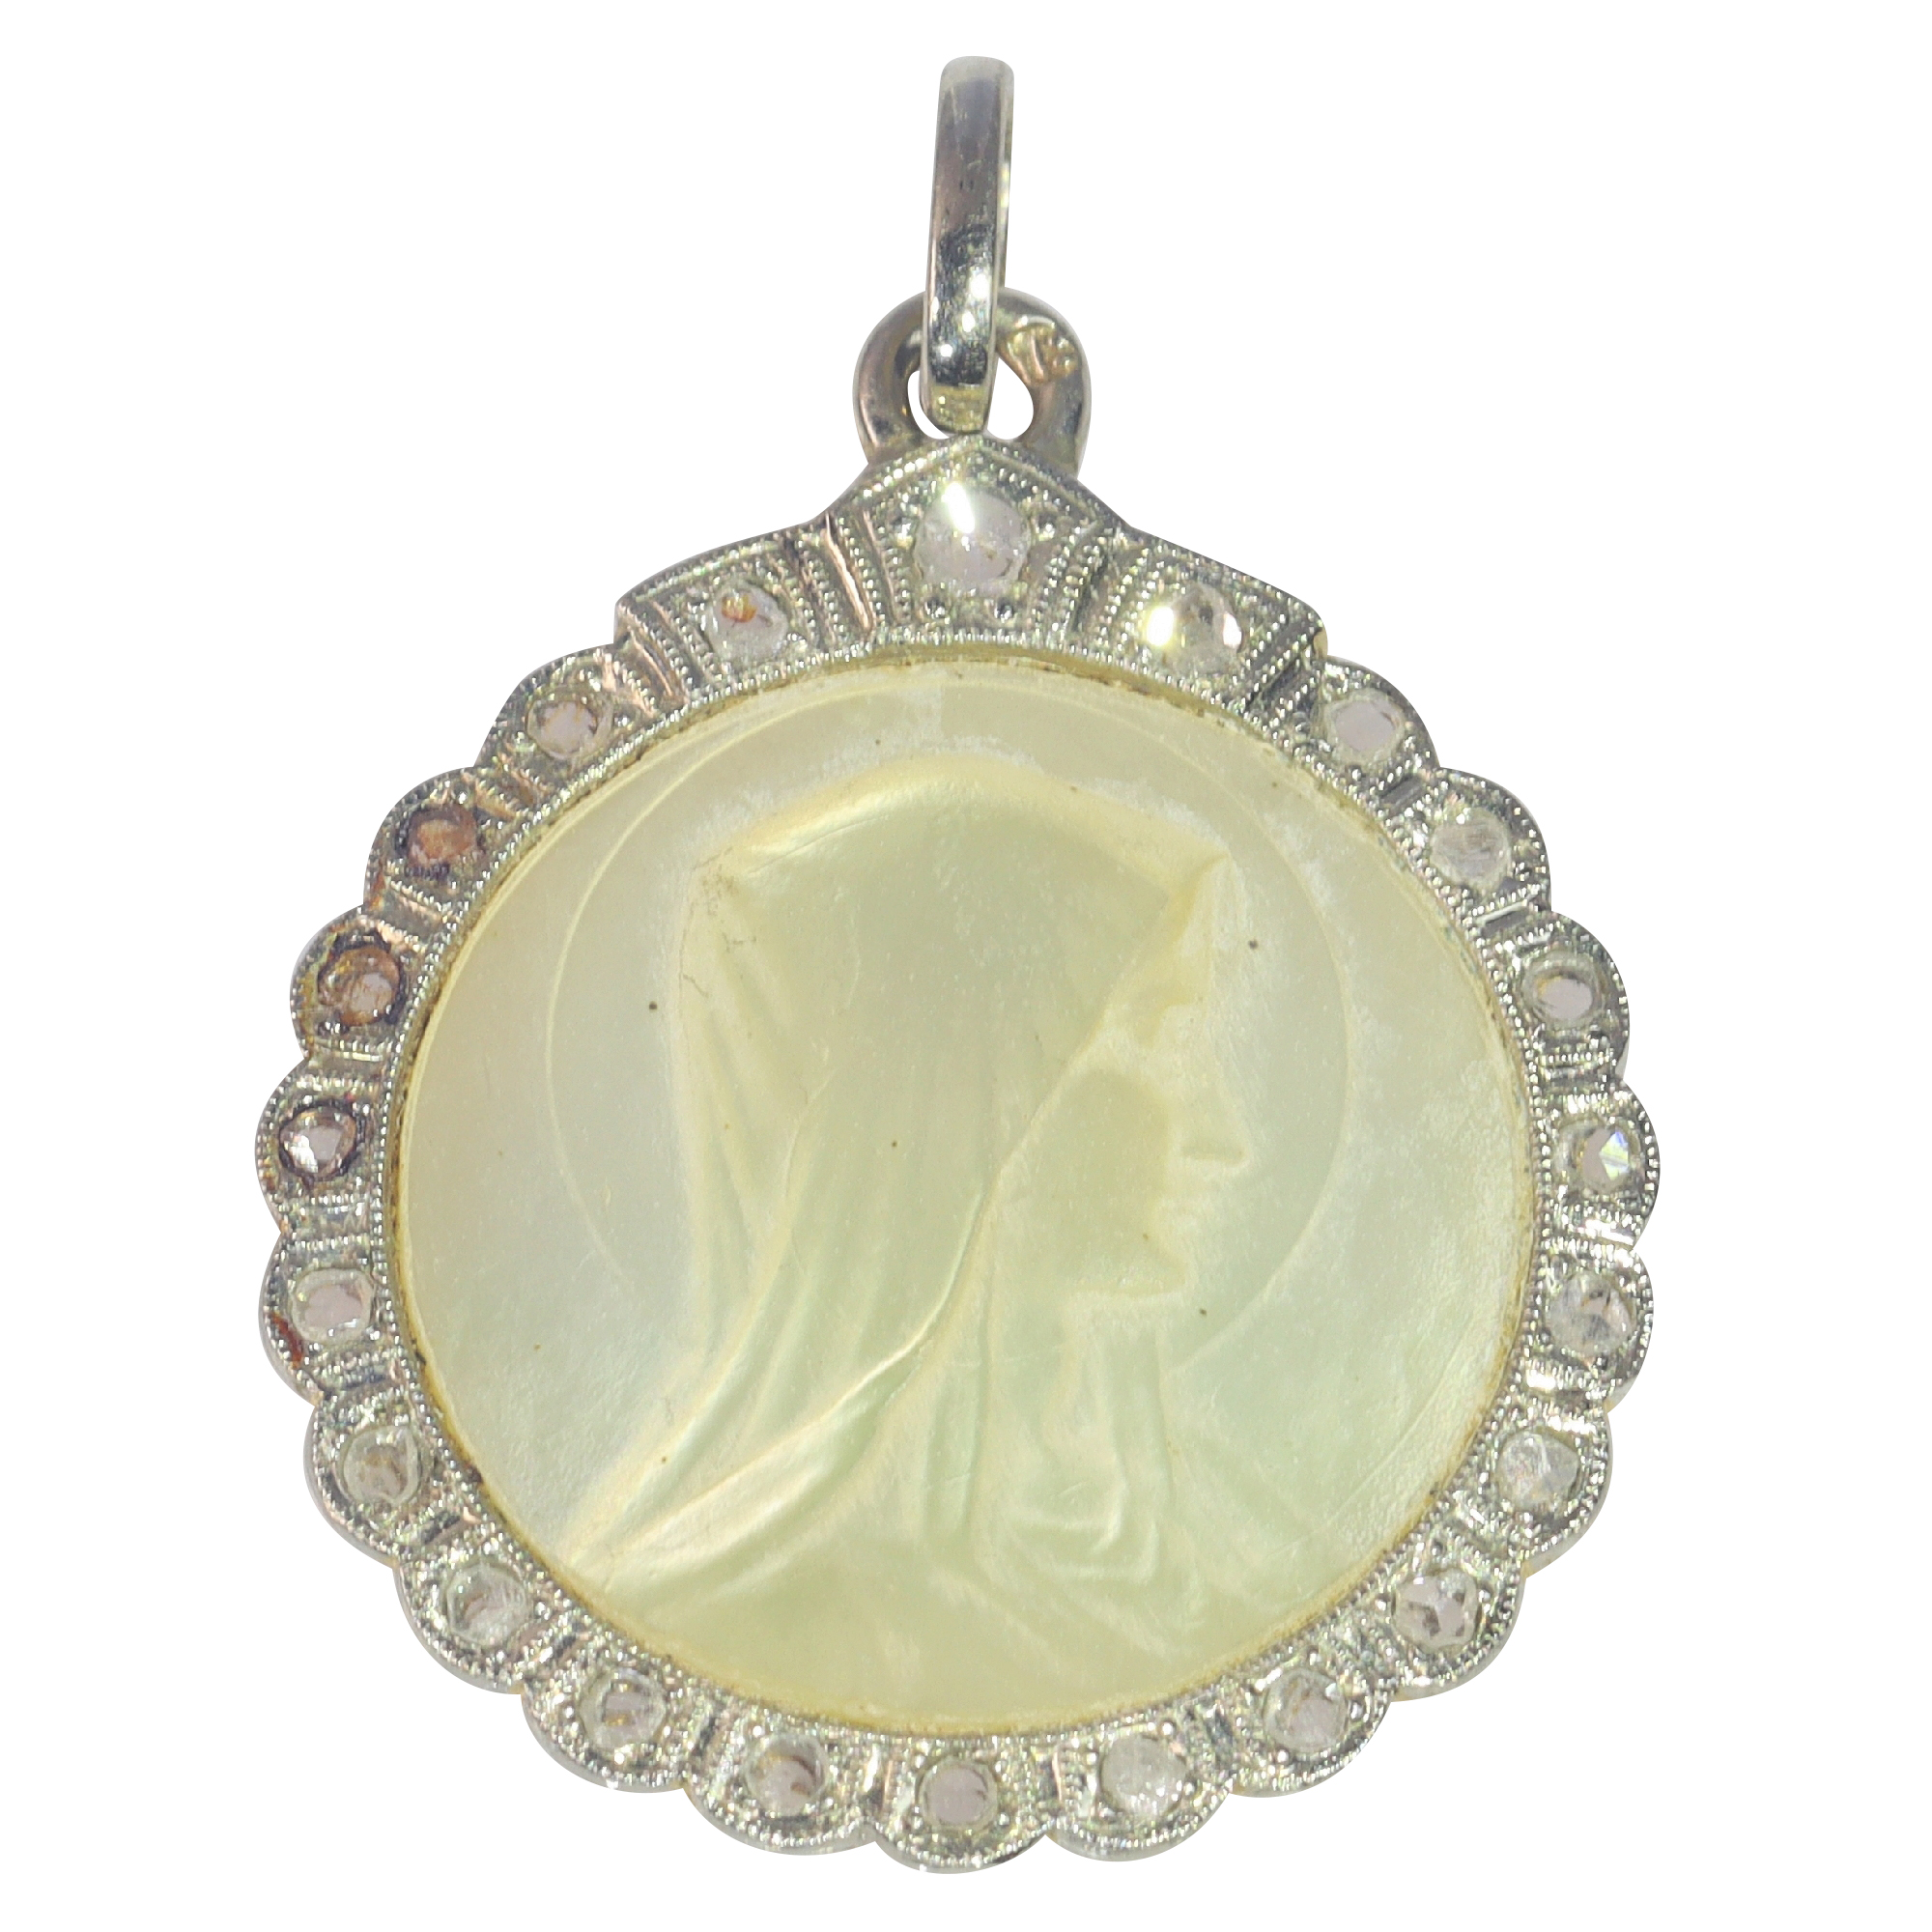 Vintage 1920's Art Deco diamond and plate of mother-of-pearl Mother Mary pendant